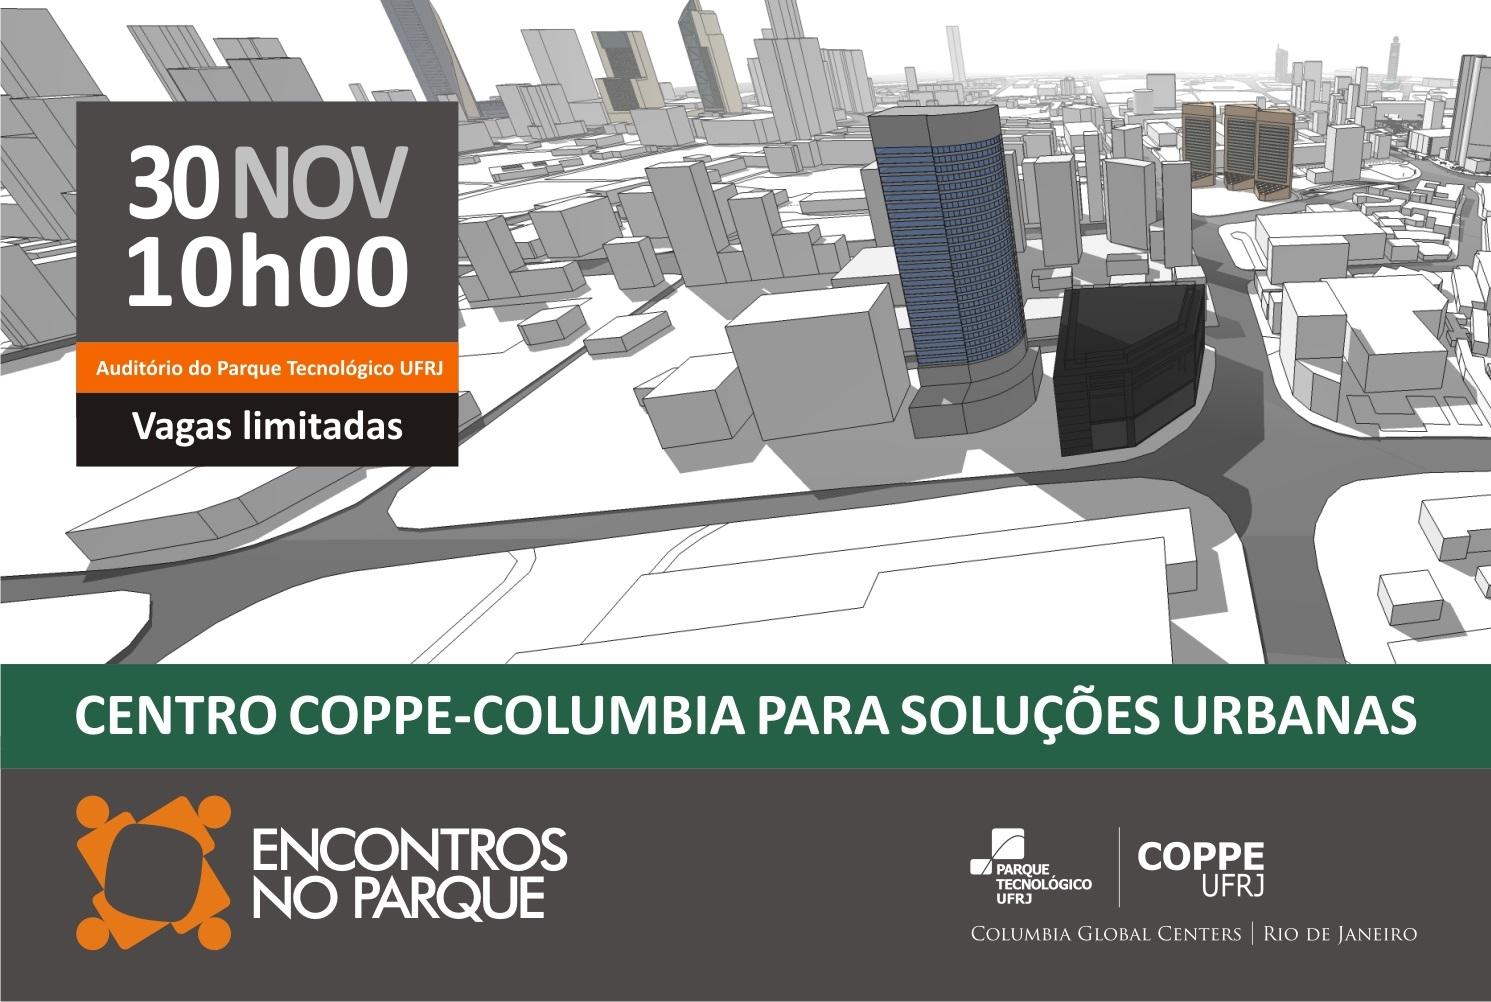 Invitation to the Innovation Hub event that will take place at UFRJ